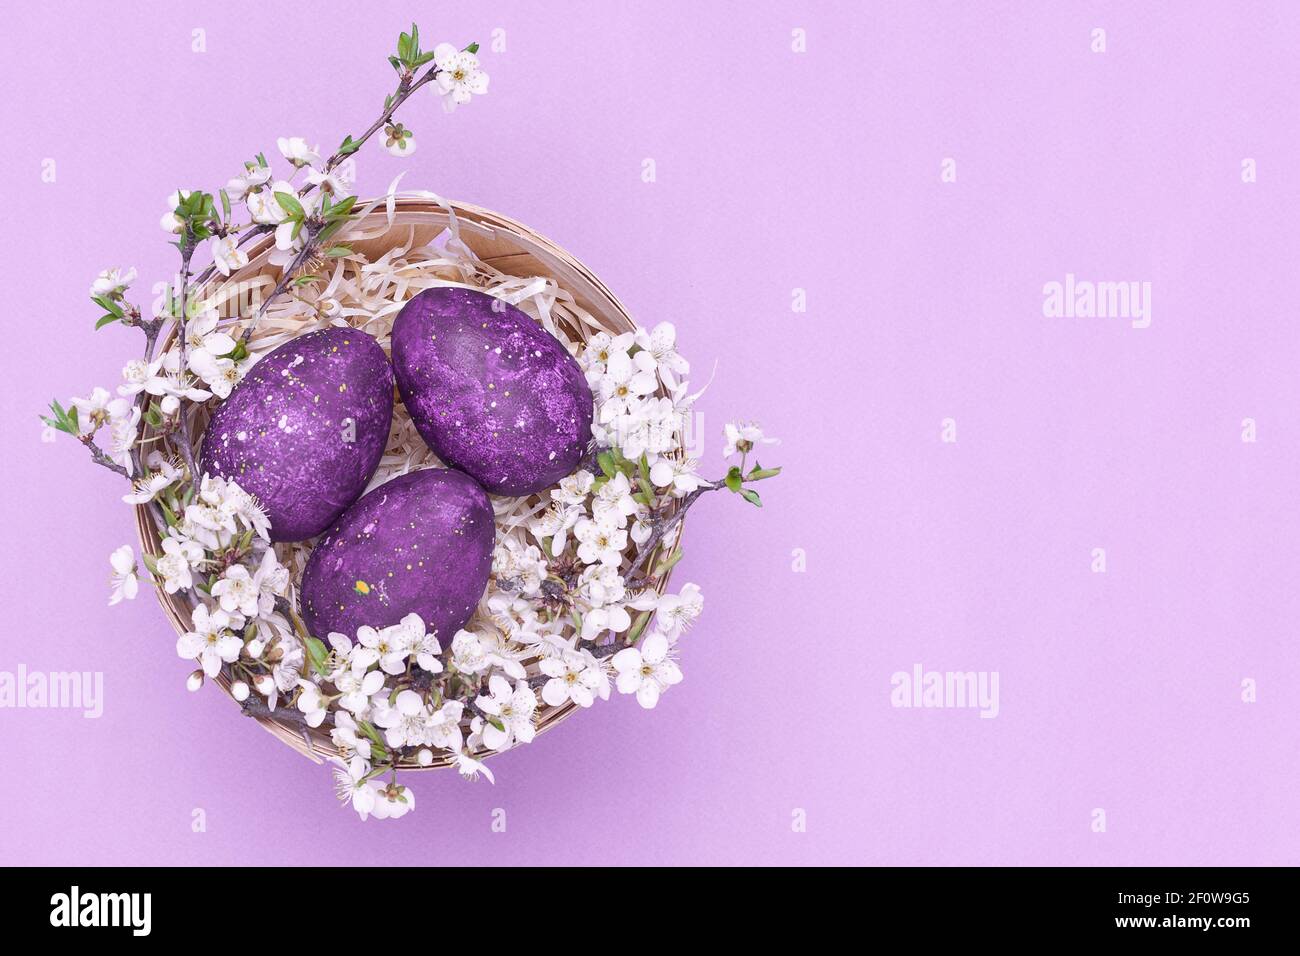 Violet easter eggs in a basket with flowers on a violet background. Horizontal photograph. Top view Stock Photo